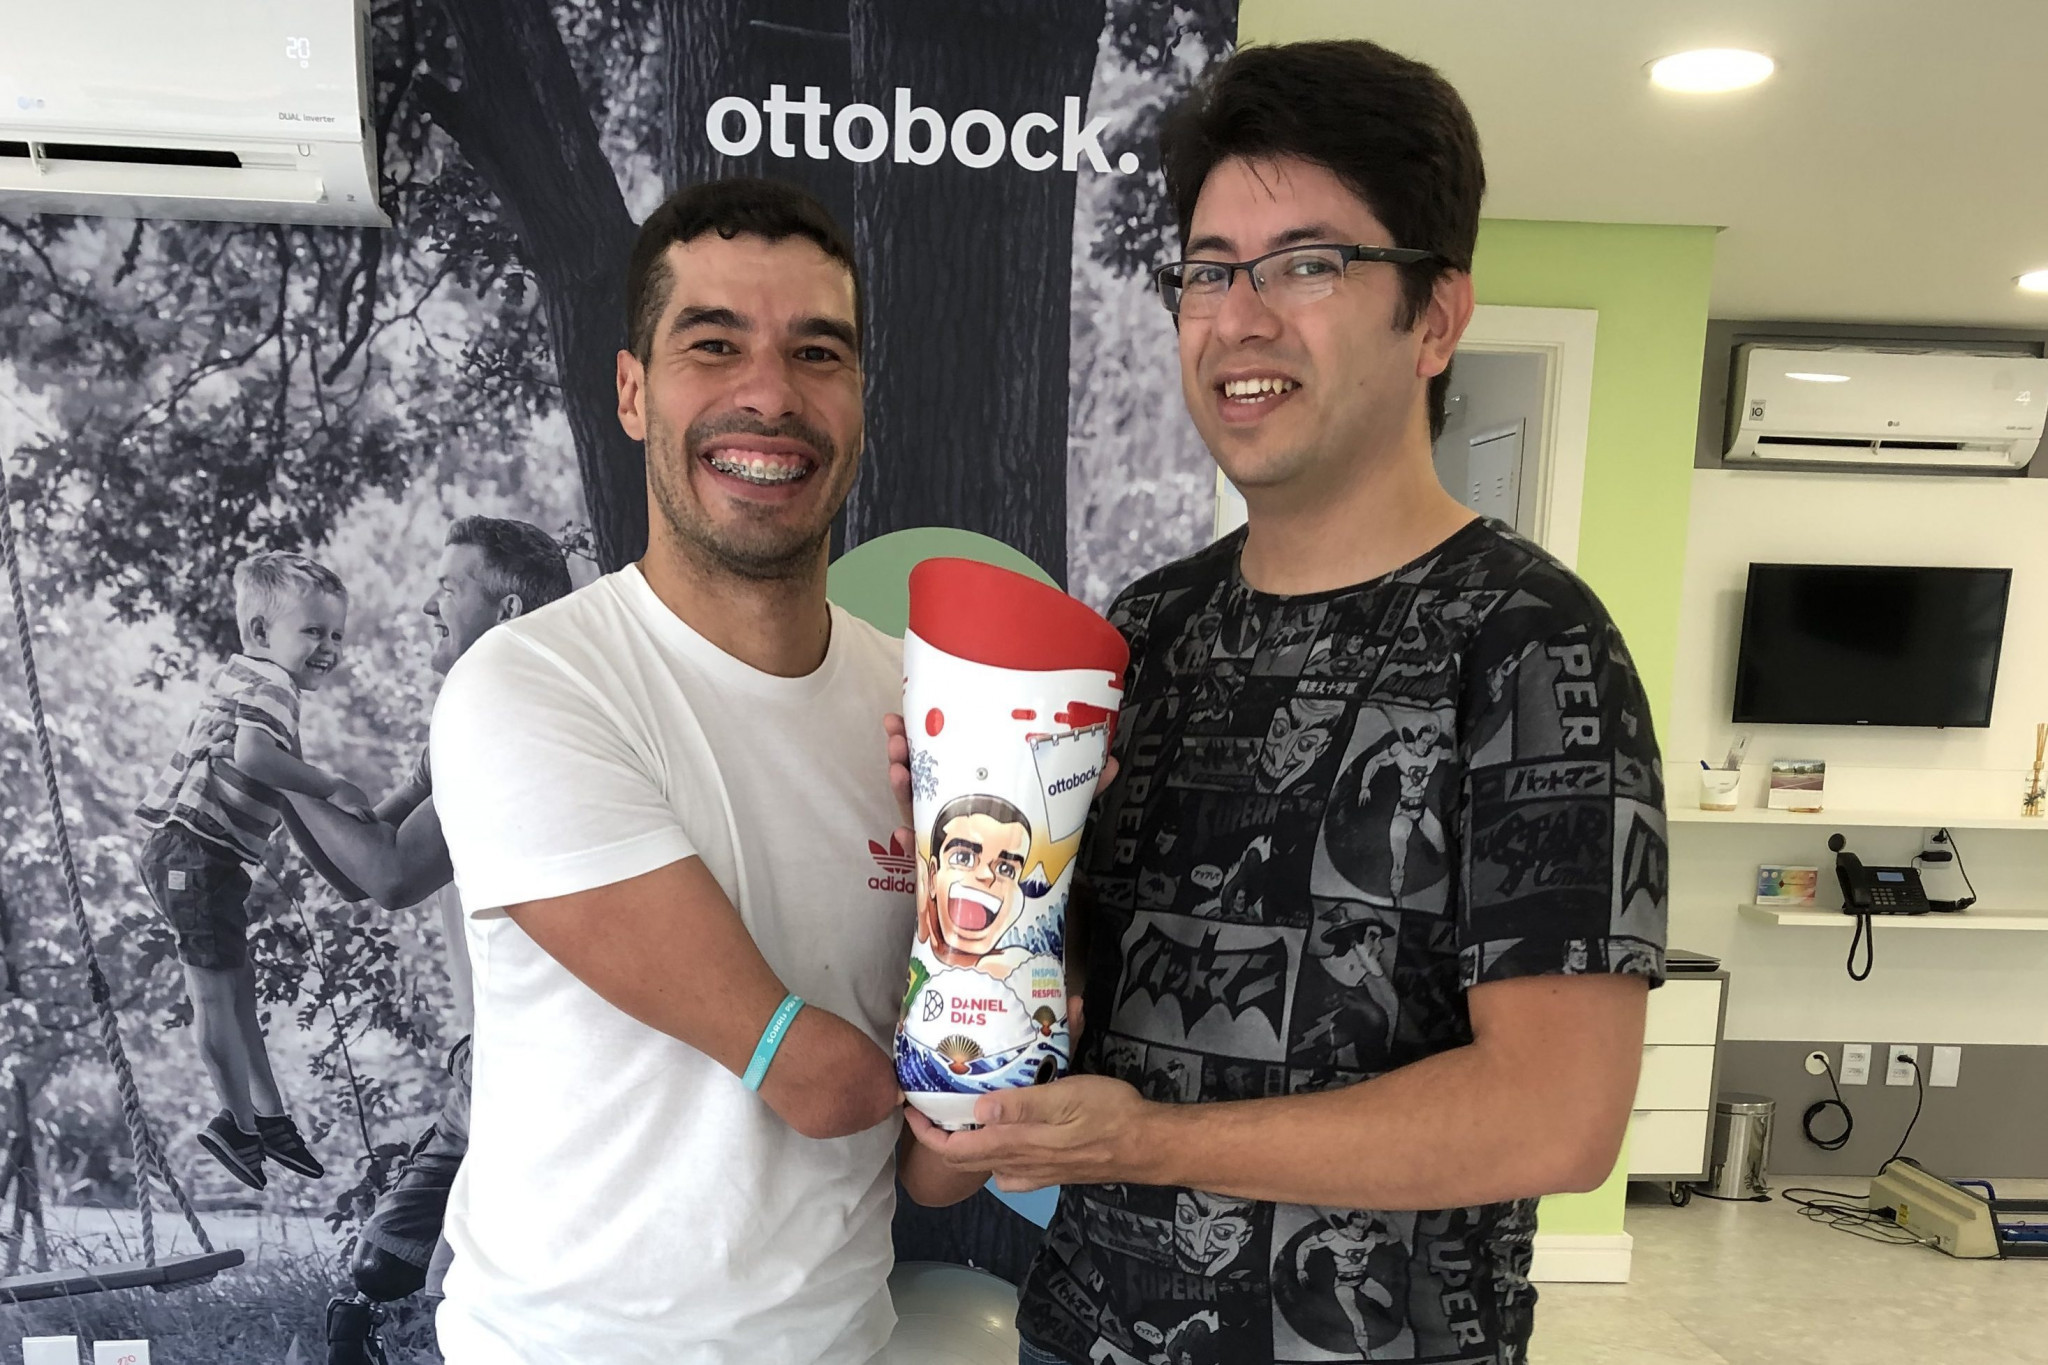 Brazil's multiple Paralympic gold medallist Daniel Dias has been given a manga-style prosthetic to use at Tokyo 2020 ©Ottobock